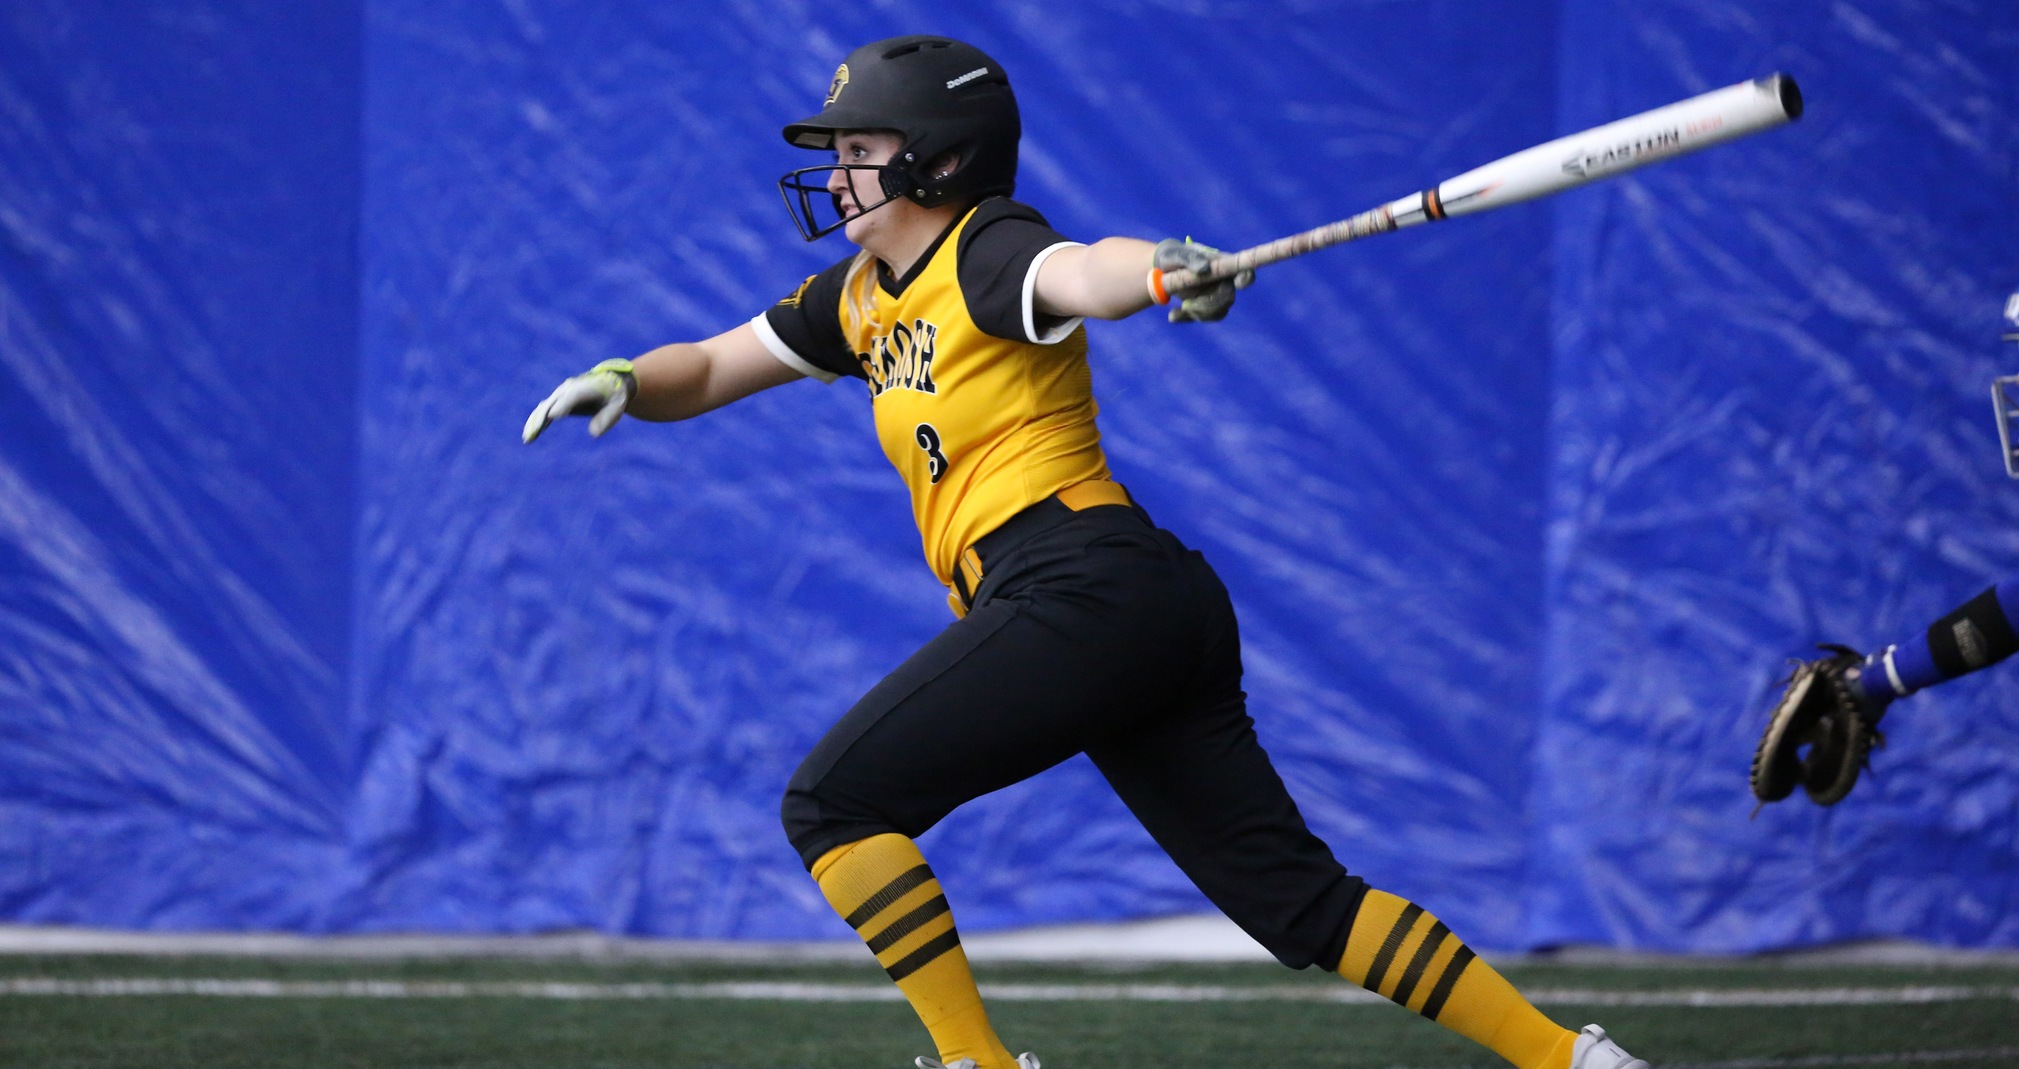 Ana Iliopoulos had five hits and seven runs batted in during her first two games as a Titan.